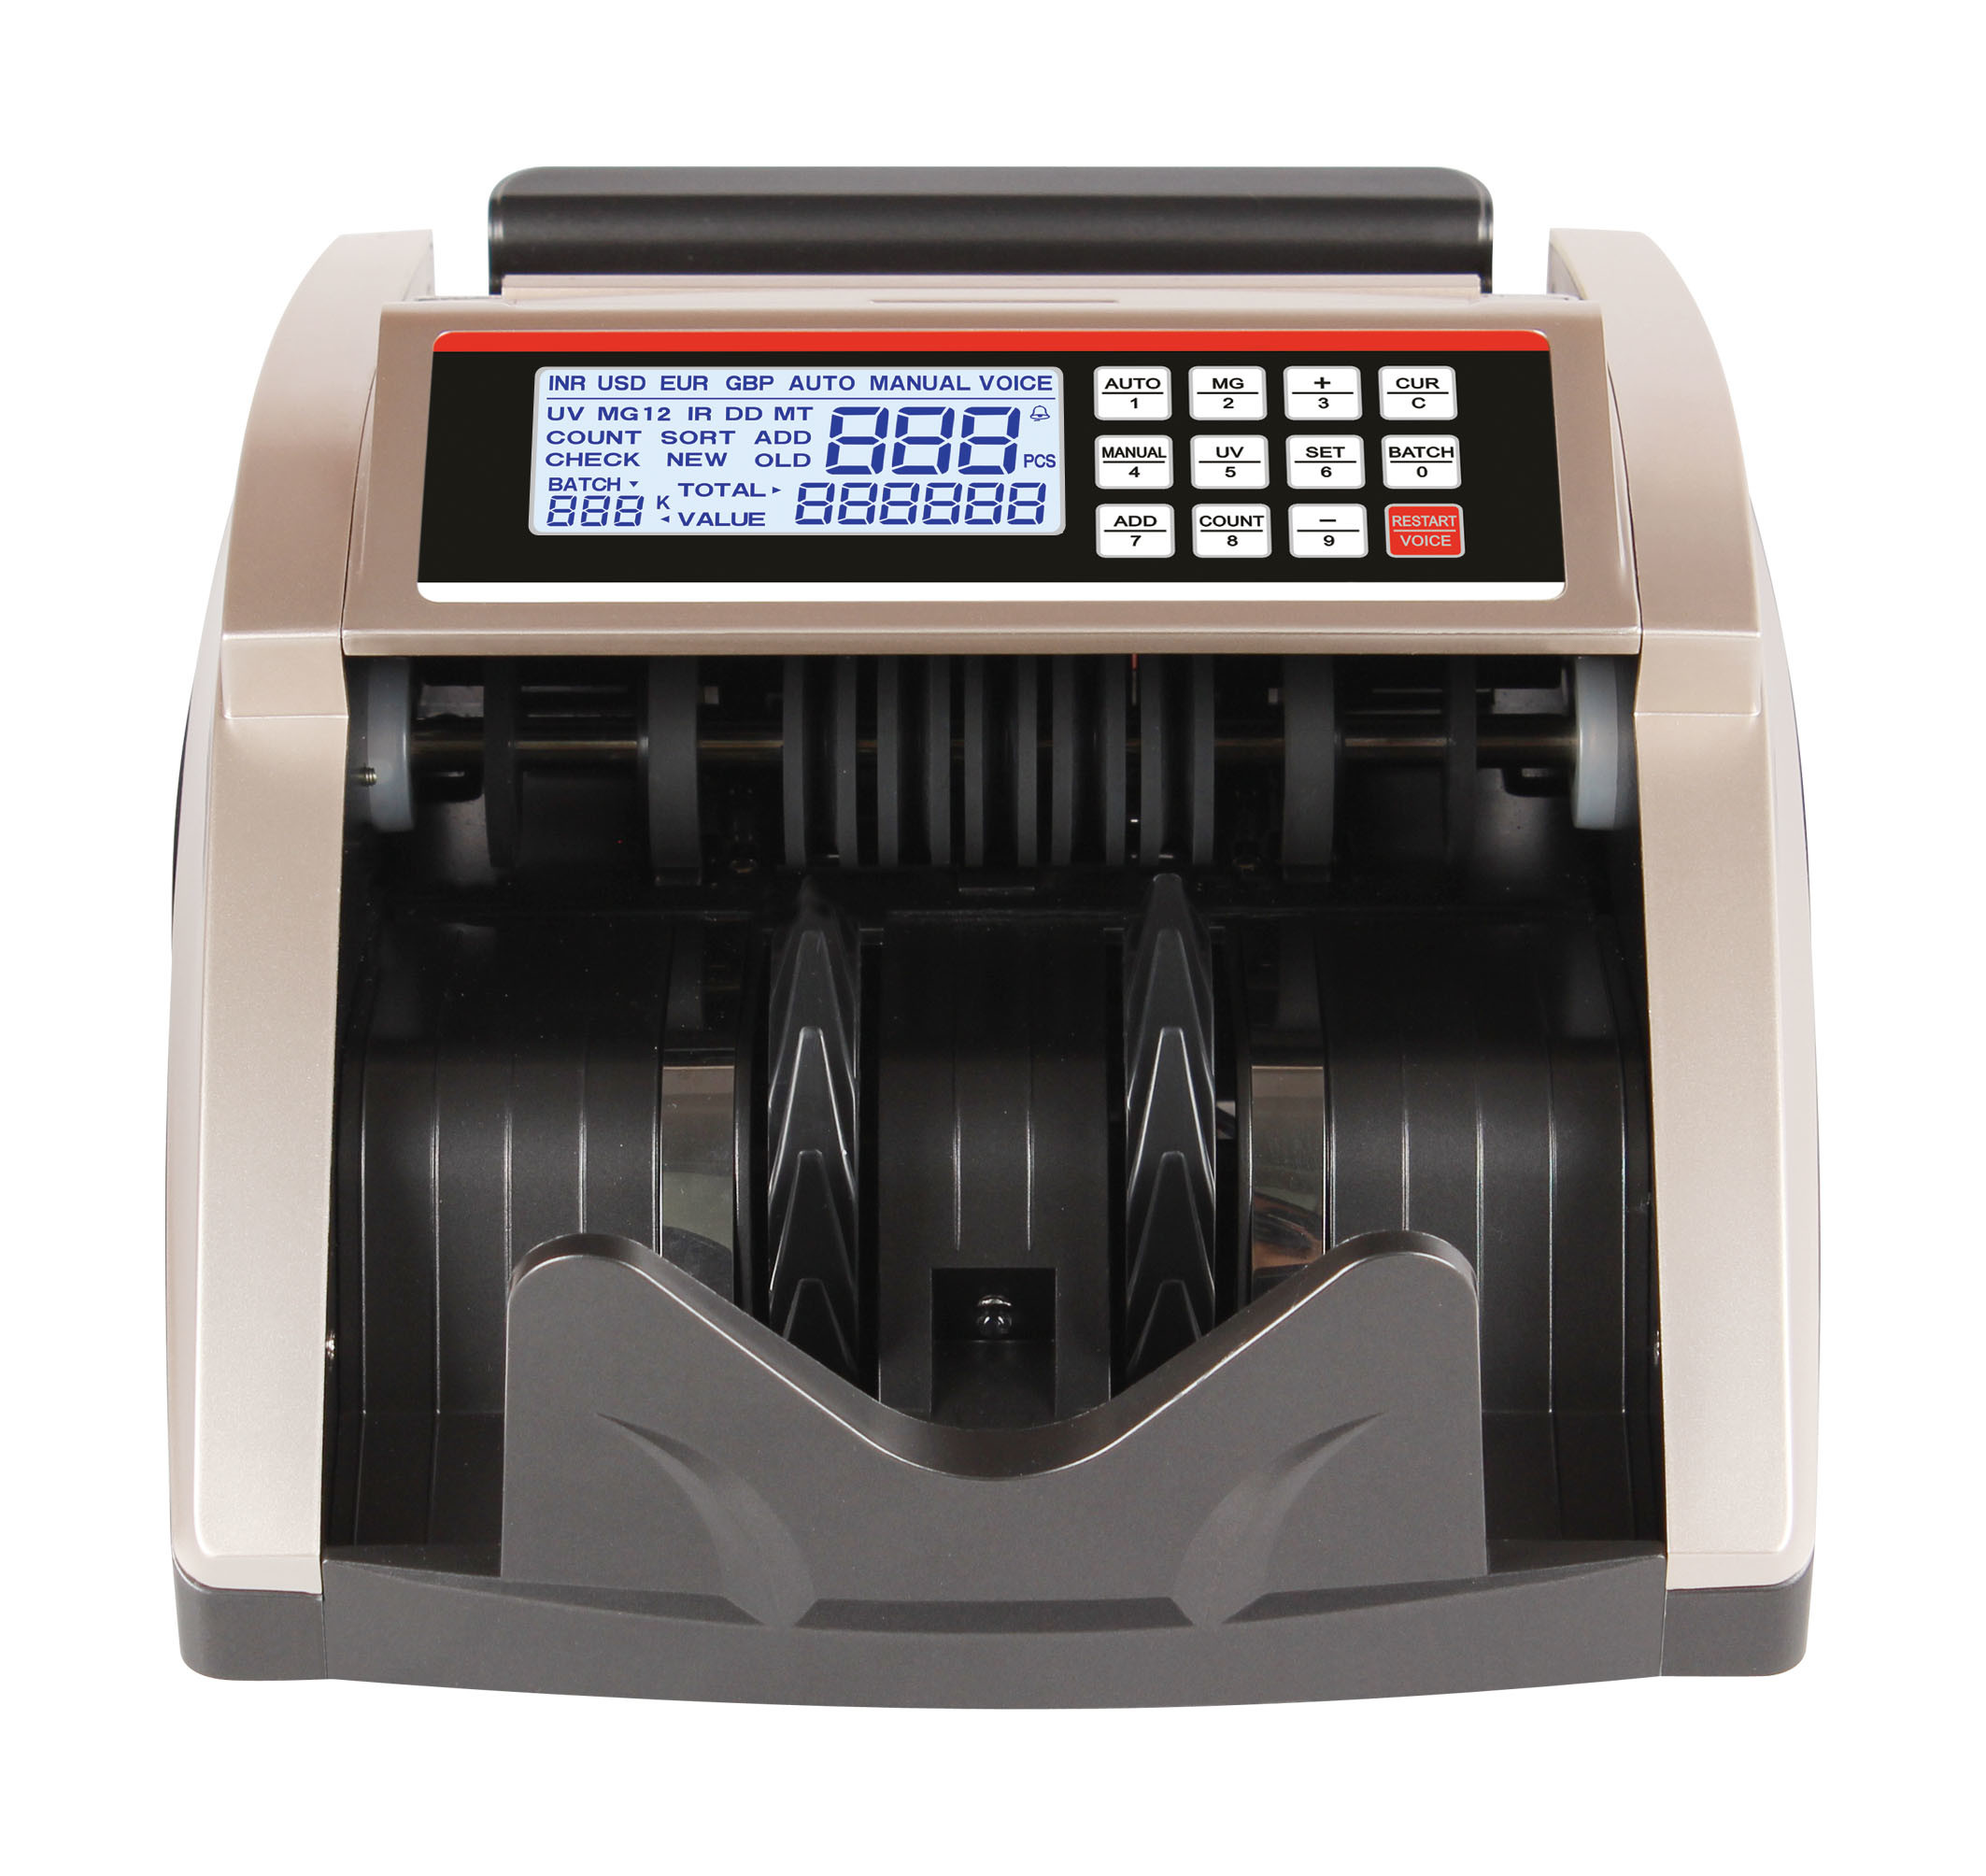 Quality CHEAP BILL COUNTER for Bangladesh Money Counting machine with MG IR UV LCD SCREEN HEAVY DUTY COUNTING MACHINE for sale